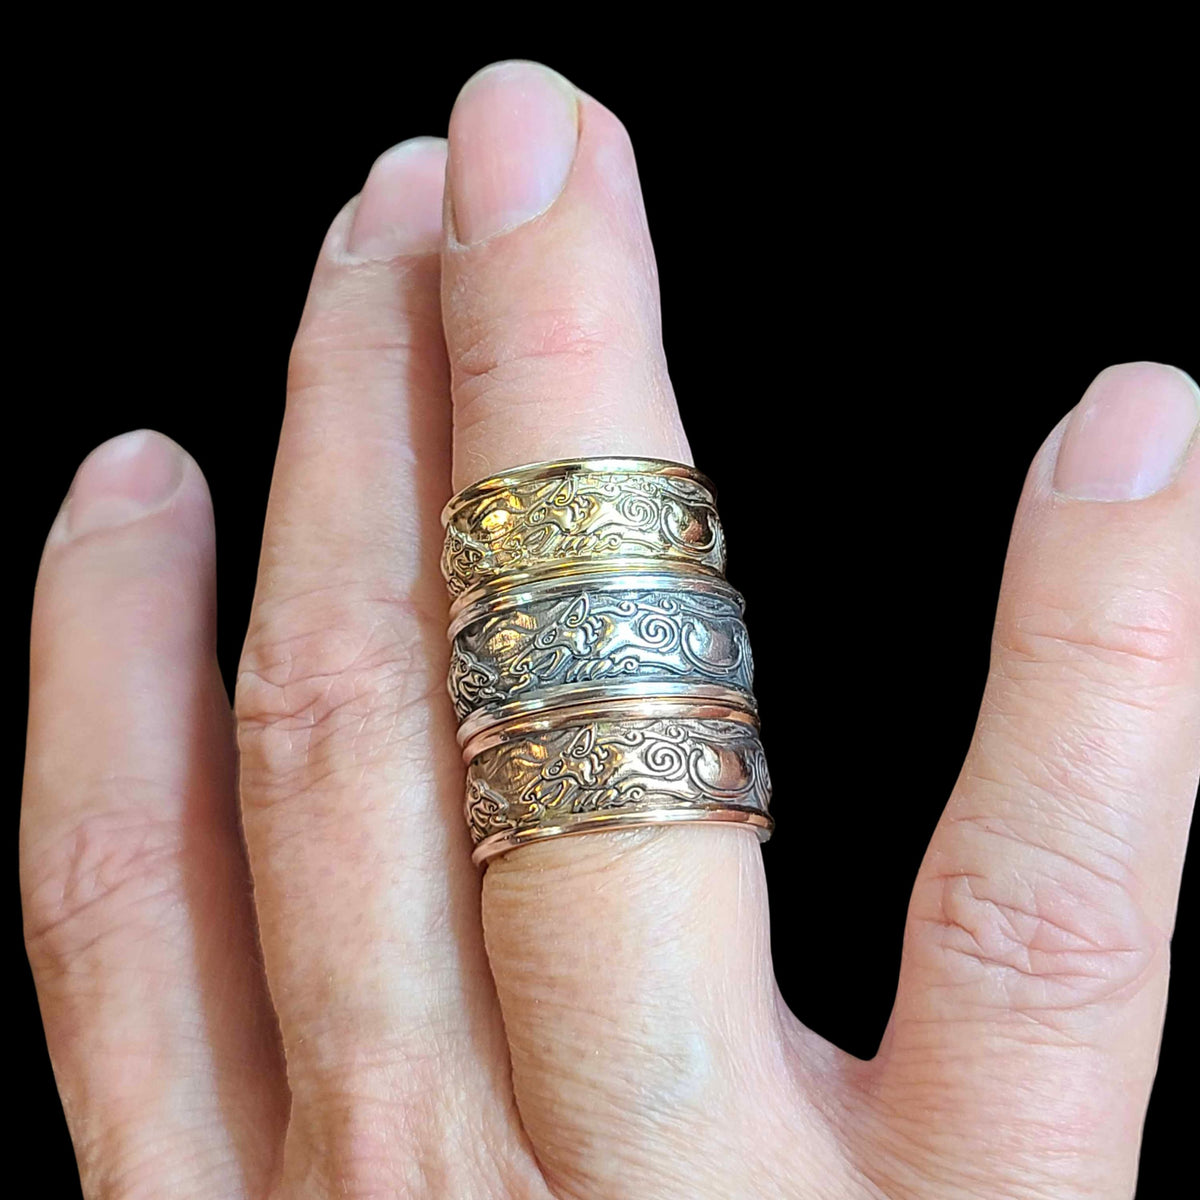 FENRIR THE WOLF ROPE Band Ring - Starting at $184